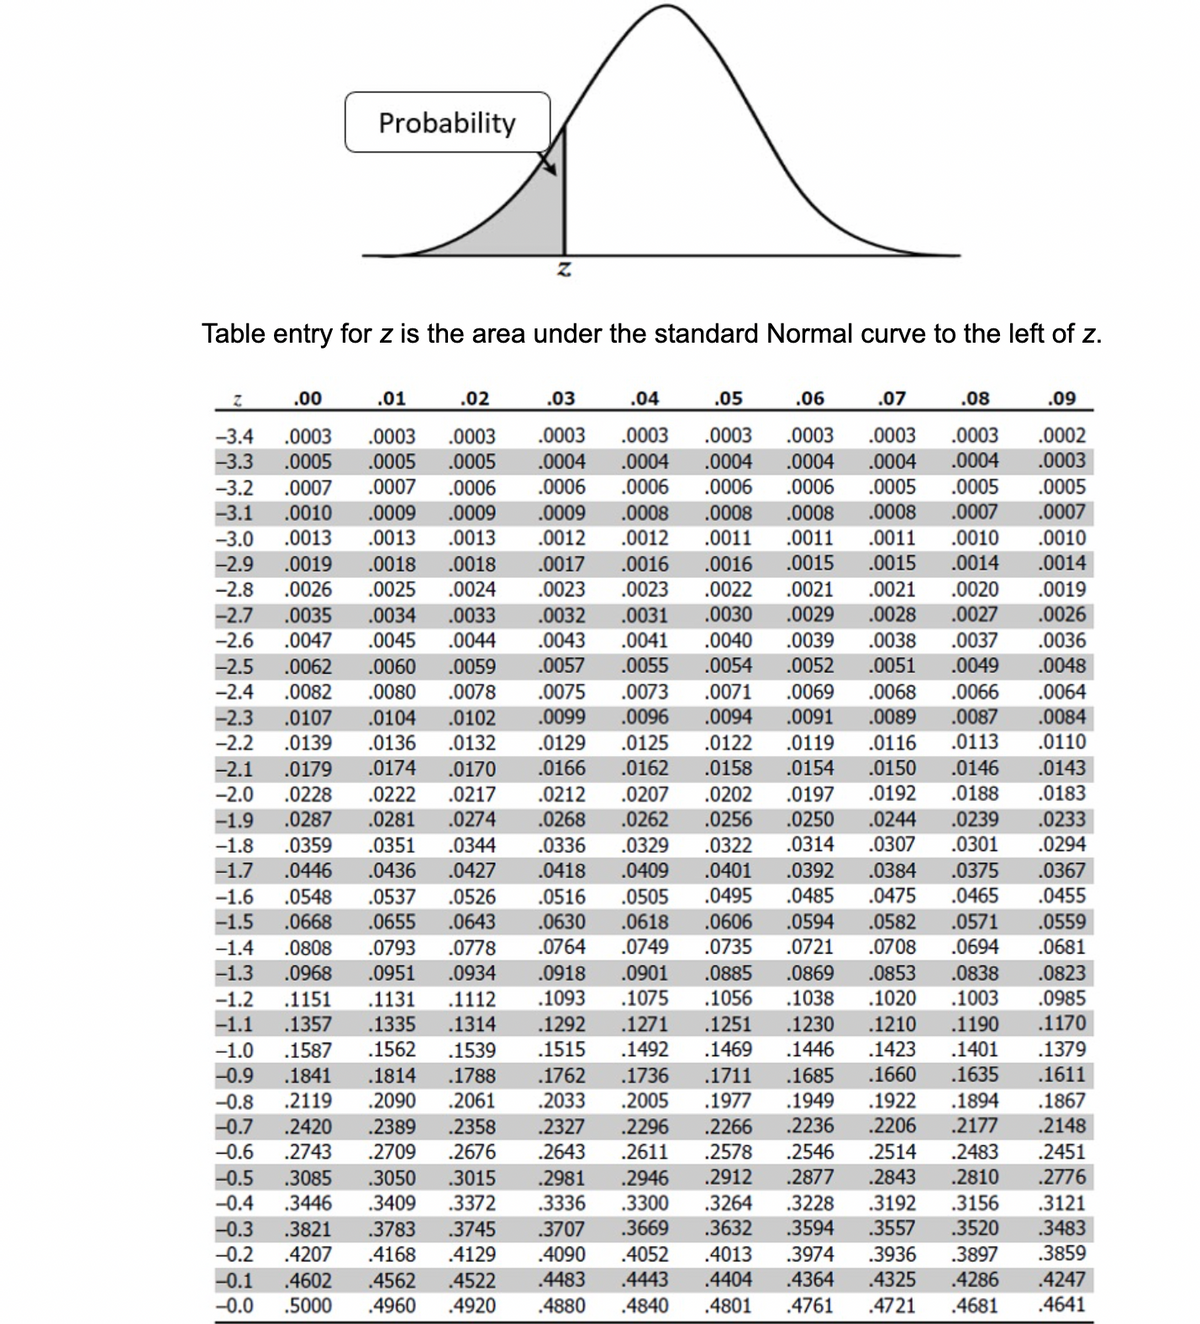 Probability
Table entry for z is the area under the standard Normal curve to the left of z.
.00
.01
.02
.03
.04
.05
.06
.07
.08
.09
-3.4
.0003
.0003
.0003
.0003
.0003
.0003
.0003
.0003
.0003
.0002
.0004
.0006
-3.3
.0005
.0005
.0005
.0004
.0004
.0004
.0004
.0004
.0003
-3.2
.0007
.0007
.0006
.0006
.0006
.0006
.0005
.0005
.0005
.0007
.0009
.0013
.0008
.0007
.0010
.0013
.0009
.0013
-3.1
.0009
.0008
.0008
.0008
-3.0
.0012
.0012
.0011
.0011
.0011
.0010
.0010
.0018
.0025
-2.9
.0019
.0018
.0017
.0016
.0016
.0015
.0015
.0014
.0014
-2.8
.0026
.0024
.0023
.0023
.0022
.0021
.0021
.0020
.0019
.0030
.0040
.0029
.0028
-2.7
-2.6
.0035
.0034
.0033
.0032
.0031
.0027
.0026
.0047
.0045
.0044
.0043
.0041
.0039
.0038
.0037
.0036
-2.5
.0062
.0060
.0059
.0057
.0055
.0054
.0052
.0051
.0049
.0048
-2.4
.0082
.0080
.0078
.0075
.0073
.0071
.0069
.0068
.0066
.0064
.0094
.0122
.0158
.0096
.0089
.0102
.0132
-2.3
.0107
.0104
.0099
.0091
.0087
.0084
-2.2
.0139
.0136
.0129
.0113
.0110
.0125
.0162
.0119
.0116
-2.1
.0179
.0174
.0170
.0166
.0154
.0150
.0146
.0143
.0228
.0287
.0222
.0281
.0197
.0250
.0314
-2.0
.0217
.0212
.0207
.0202
.0192
.0188
.0183
-1.9
.0274
.0268
.0262
.0256
.0244
.0239
.0233
-1.8
.0359
.0351
.0344
.0336
.0329
.0322
.0307
.0301
.0294
-1.7
.0446
.0436
.0427
.0418
.0409
.0401
.0392
.0384
.0375
.0367
.0495
.0485
.0475
.0465
.0455
-1.6
-1.5
.0537
.0526
.0643
.0548
.0516
.0505
.0618
.0559
.0681
.0668
.0655
.0630
.0606
.0594
.0582
.0571
-1.4
.0808
.0793
.0778
.0764
.0749
.0735
.0721
.0708
.0694
-1.3
.0968
.0951
.0934
.0918
.0901
.0885
.0869
.0853
.0838
.0823
.0985
.1170
-1.2
.1093
.1056
.1038
.1020
.1003
.1151
.1357
.1131
.1112
.1075
-1.1
.1335
.1314
.1292
.1271
.1251
.1230
.1210
.1190
-1.0
.1587
.1562
.1539
.1515
.1492
.1469
.1446
.1423
.1401
.1379
.1762
.2033
.1711
.1977
-0.9
.1841
.1814
.1788
.1736
.1685
.1660
.1635
.1611
.2090
.2389
.2005
.2296
-0.8
.2119
.2061
.1949
.1922
.1894
.1867
-0.7
.2420
.2358
.2327
.2266
.2236
.2206
.2177
.2148
-0.6
.2743
.2709
.2676
.2643
.2611
.2578
.2546
.2514
.2483
.2451
.2912
.2877
.2843
.3050
.3409
.2810
.2776
-0.5
-0.4
.3085
.3015
.2981
.2946
.3372
.3745
.3446
.3336
.3300
.3264
.3121
.3228
.3594
.3192
.3156
.3632
.3557
-0.3
-0.2
.3821
.3783
.3707
.3669
.3520
.3483
.4052
.3859
.4013
.4404
.4207
.4168
.4129
.4090
.3974
.3936
.3897
.4483
.4880
-0.1
.4602
.4562
.4522
.4443
.4364
.4325
.4286
.4247
-0.0
.5000
.4960
.4920
.4840
.4801
.4761
.4721
.4681
.4641
